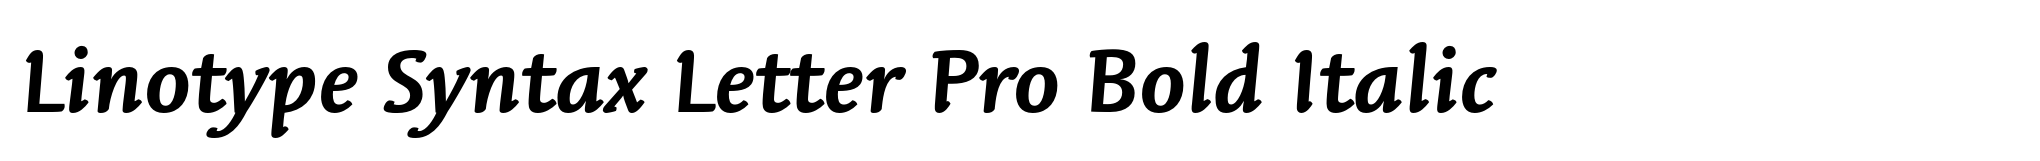 Linotype Syntax Letter Pro Bold Italic image